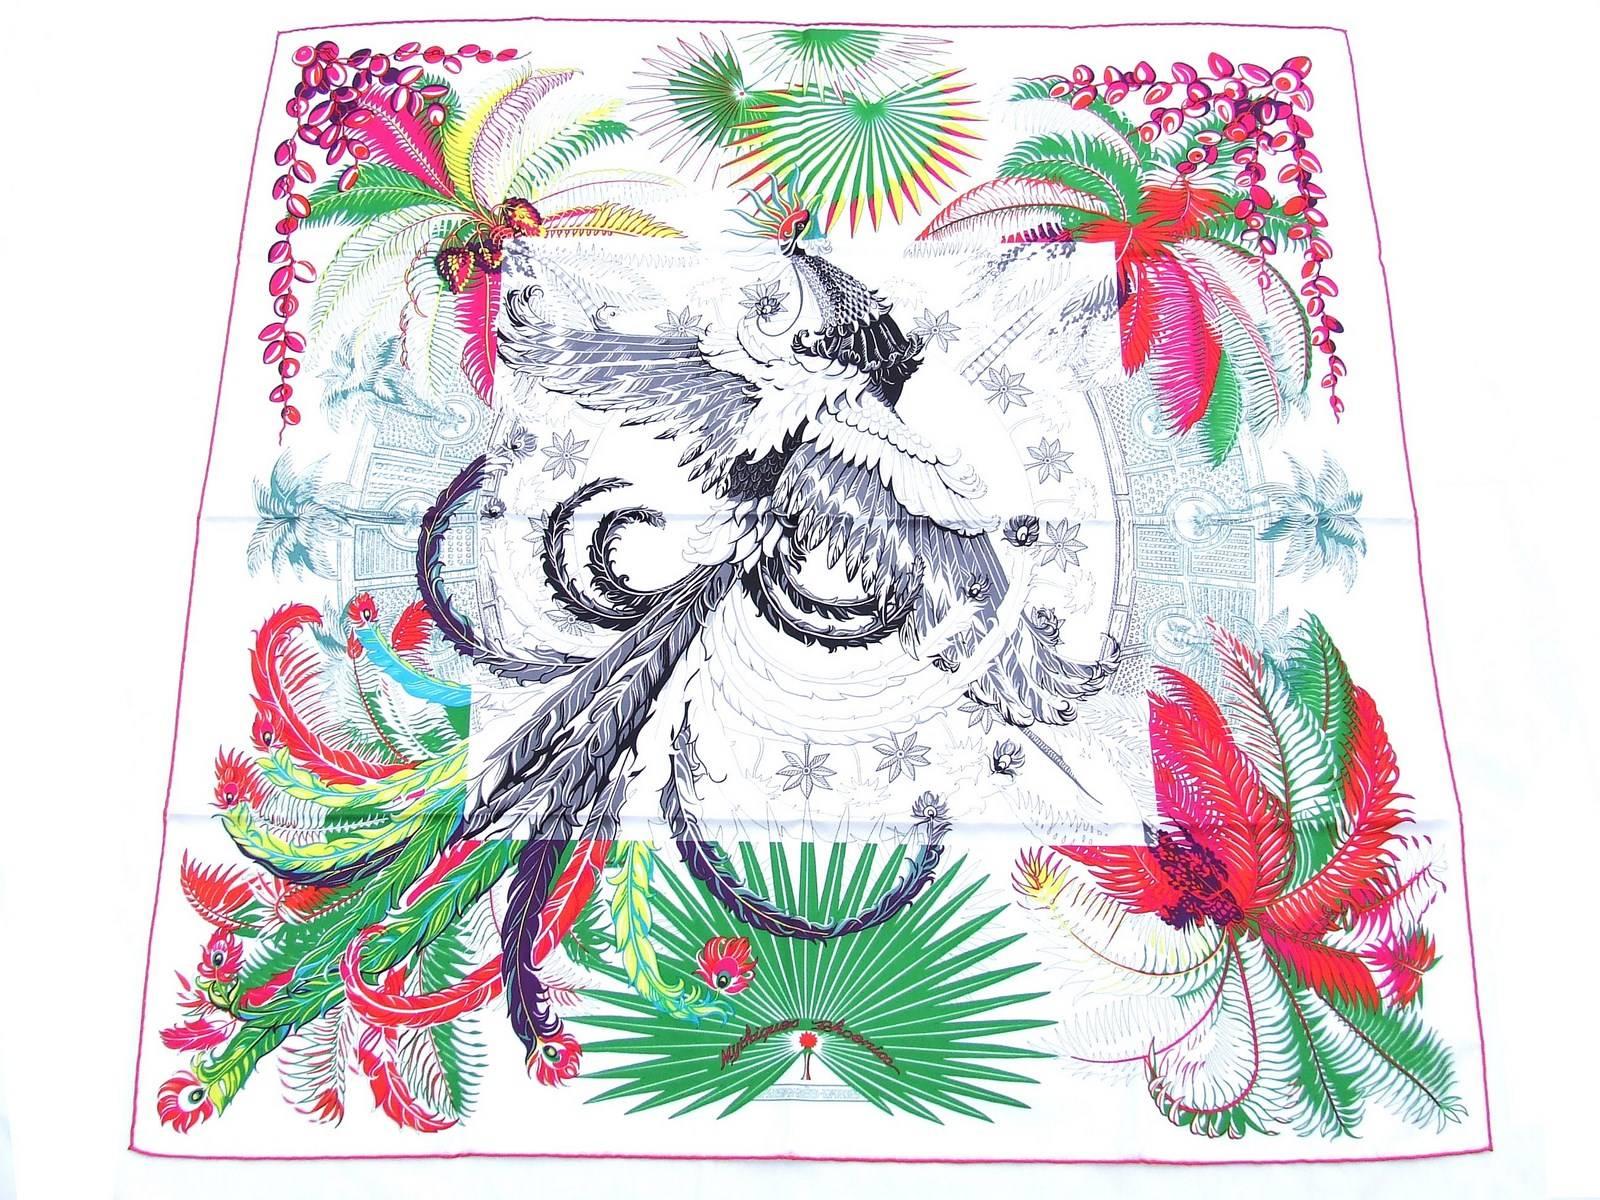 BEAUTIFUL AUTHENTIC HERMES SCARF

Pattern: 